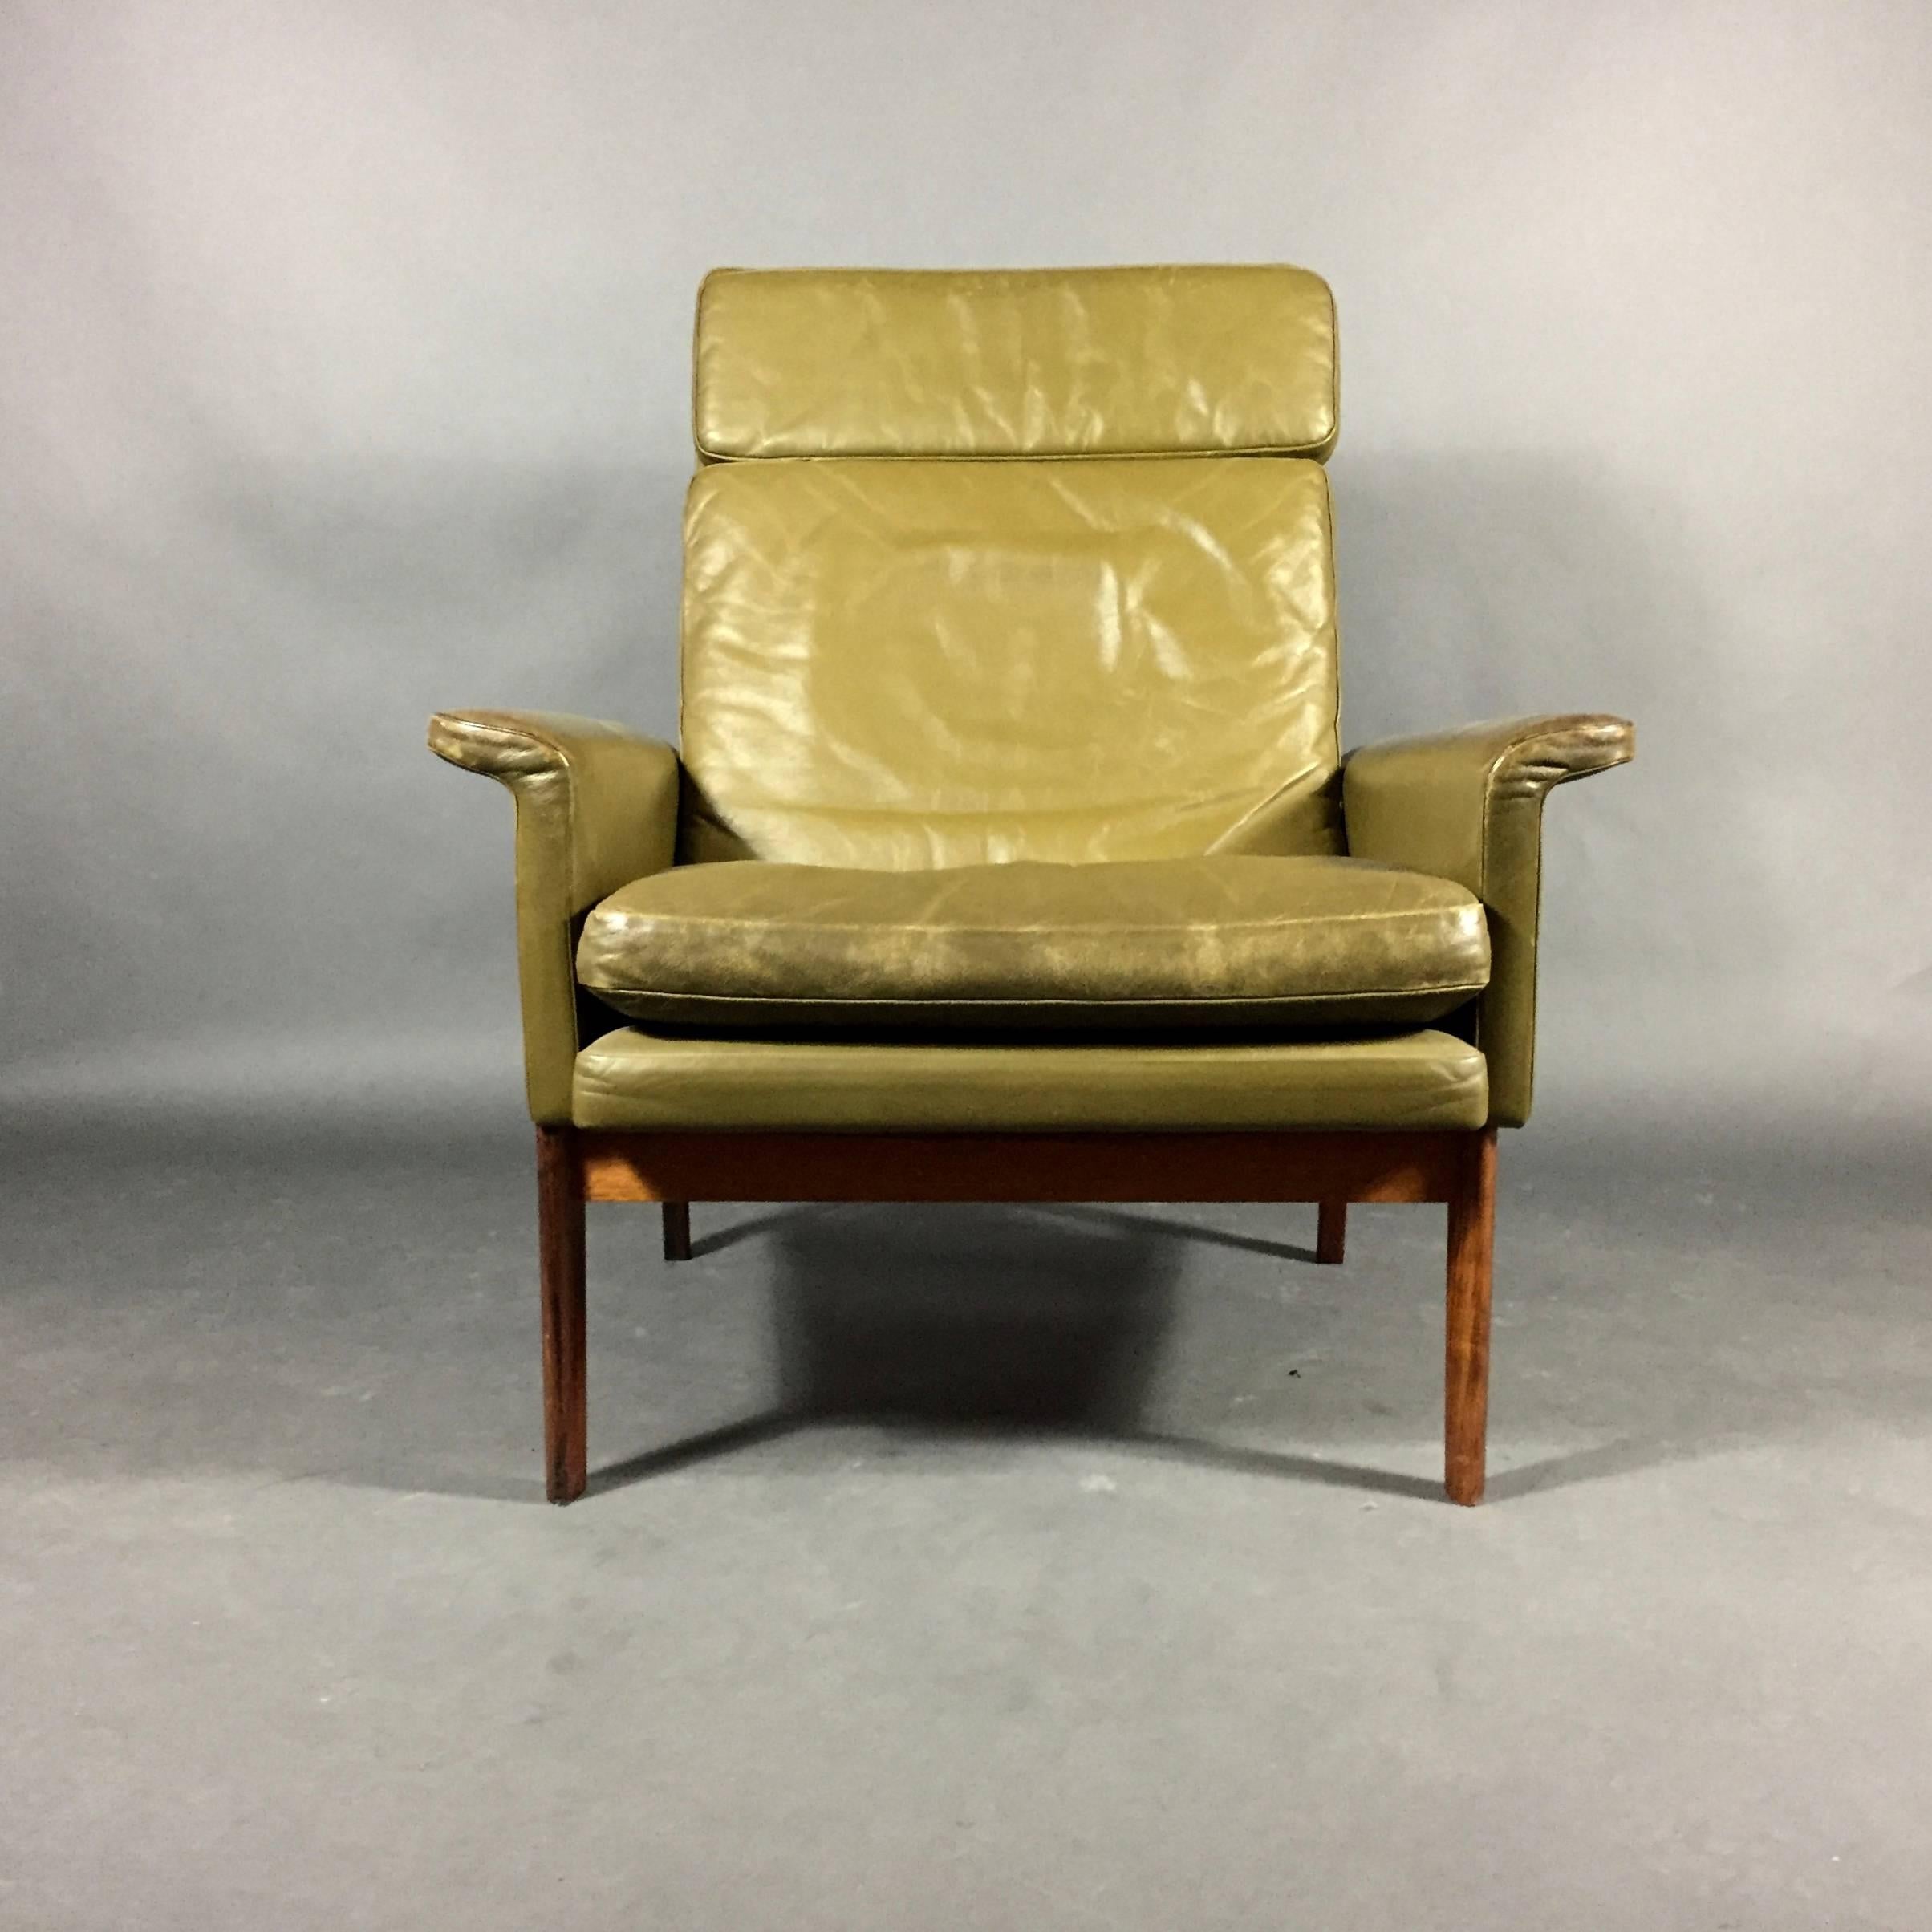 Designed in 1965 by Finn Juhl for France & Søn, the Jupiter series is made for comfort with a semi-reclining design and rosewood legs on this Model 218. The perfect late 1960s avocado leather color is Classic and soft. Denmark late 1960s.